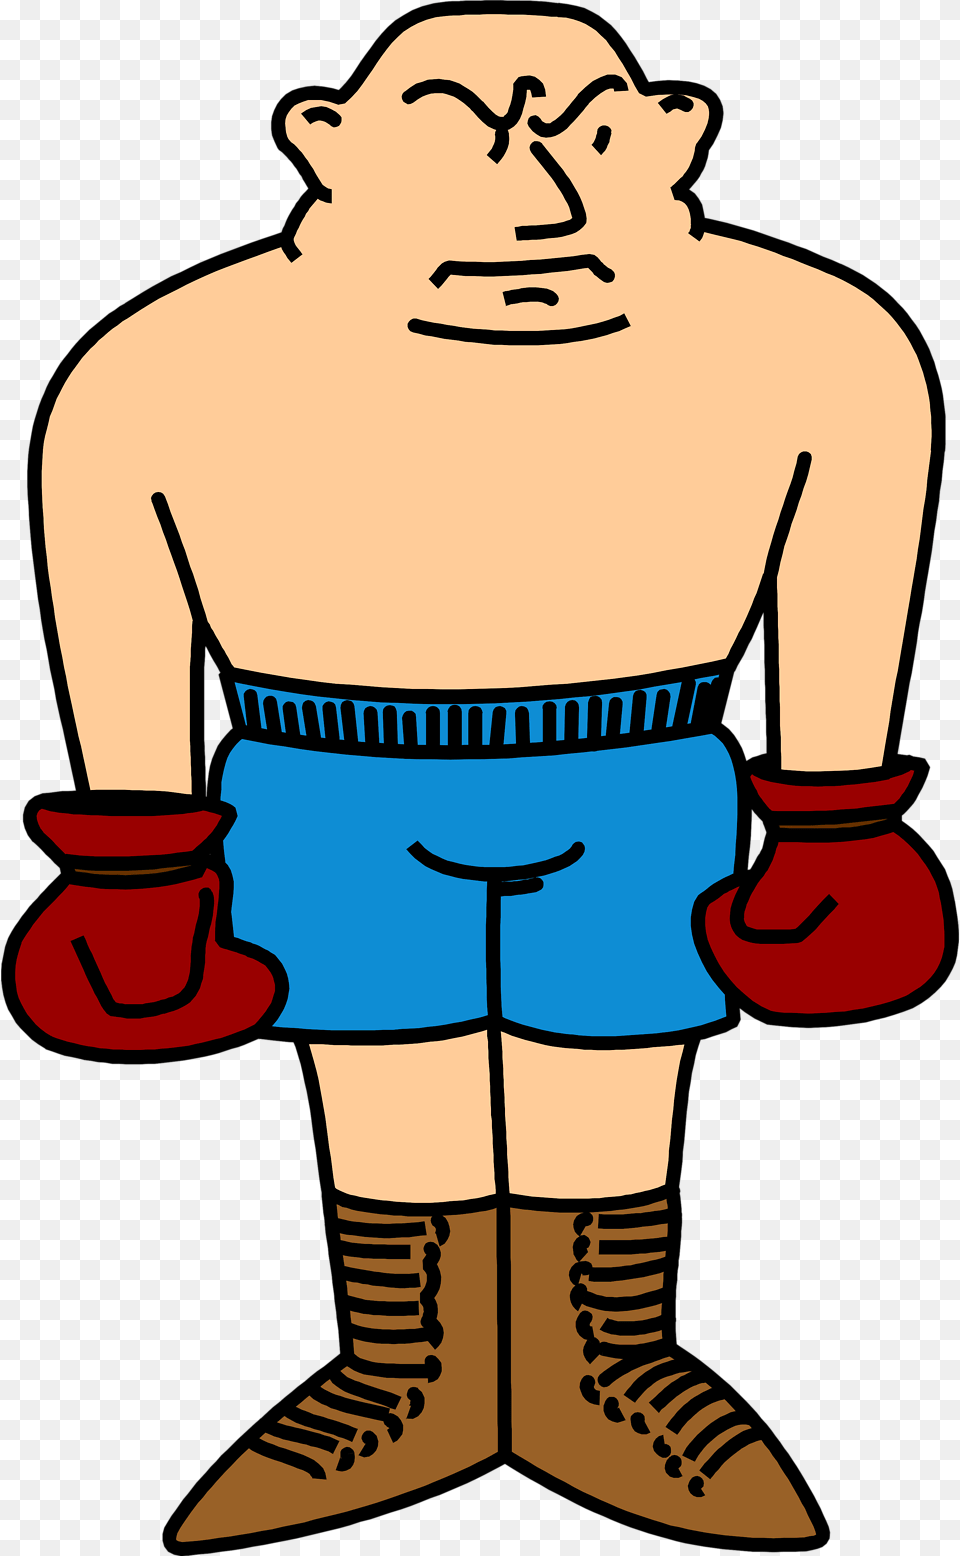 Boxing Stock Photo Illustration Of A Boxer, Clothing, Shorts, Glove, Adult Free Transparent Png